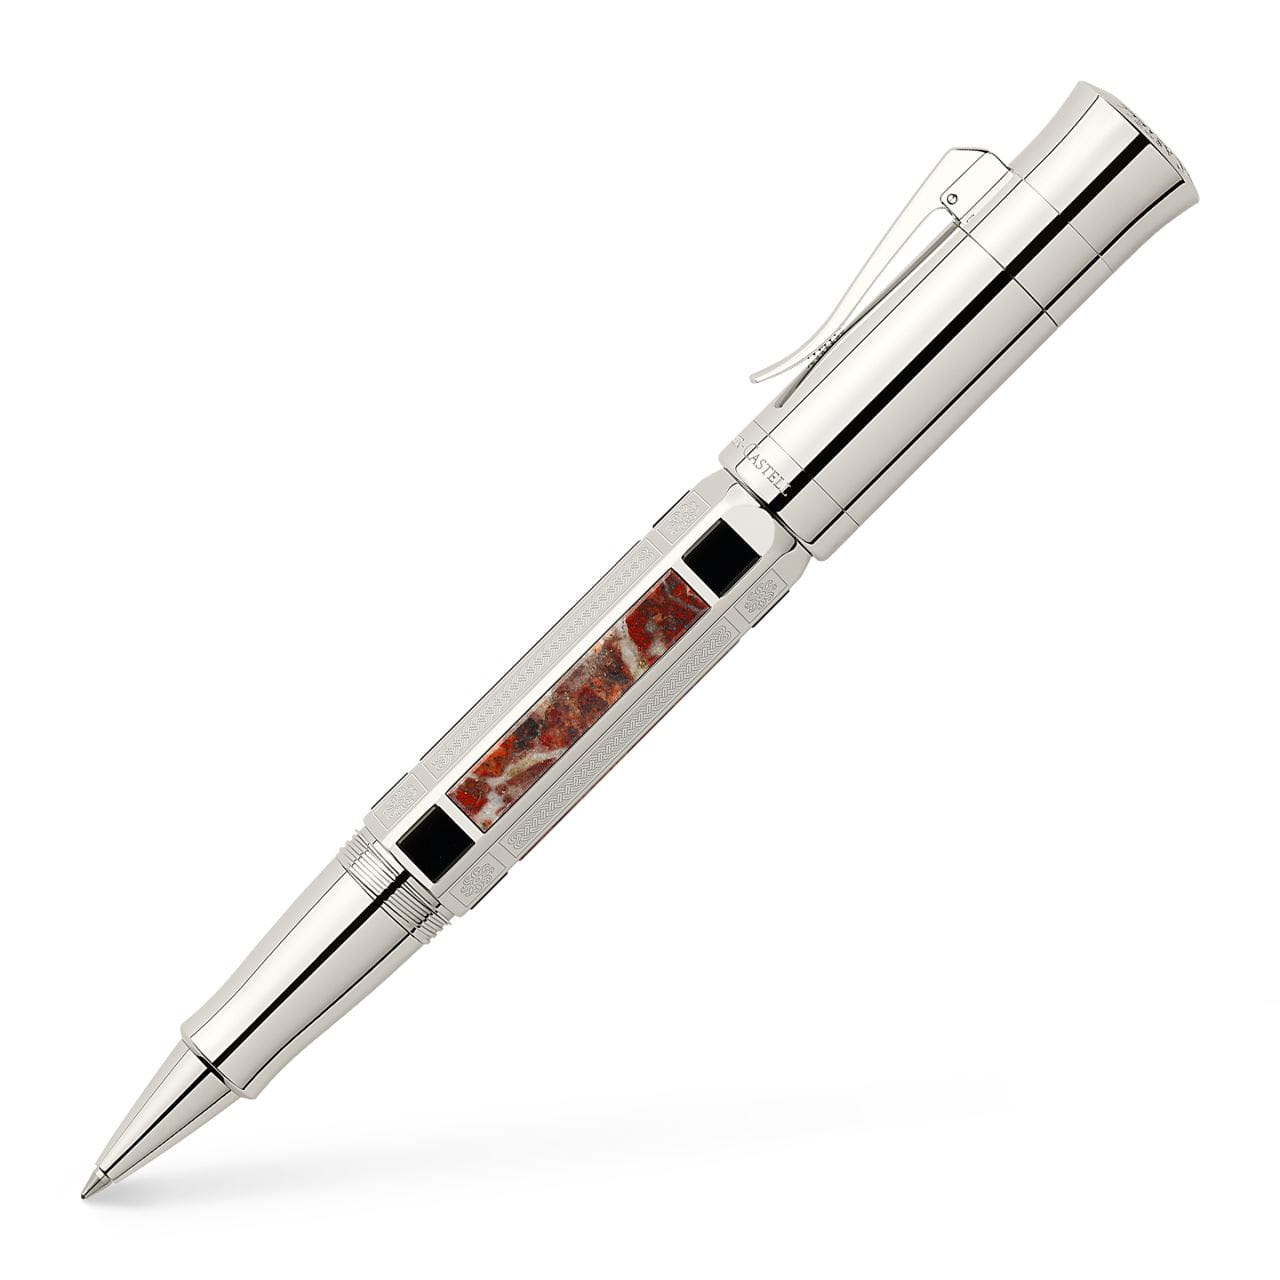 Graf-von-Faber-Castell - Rollerball pen Pen of the Year 2014 platinum-plated